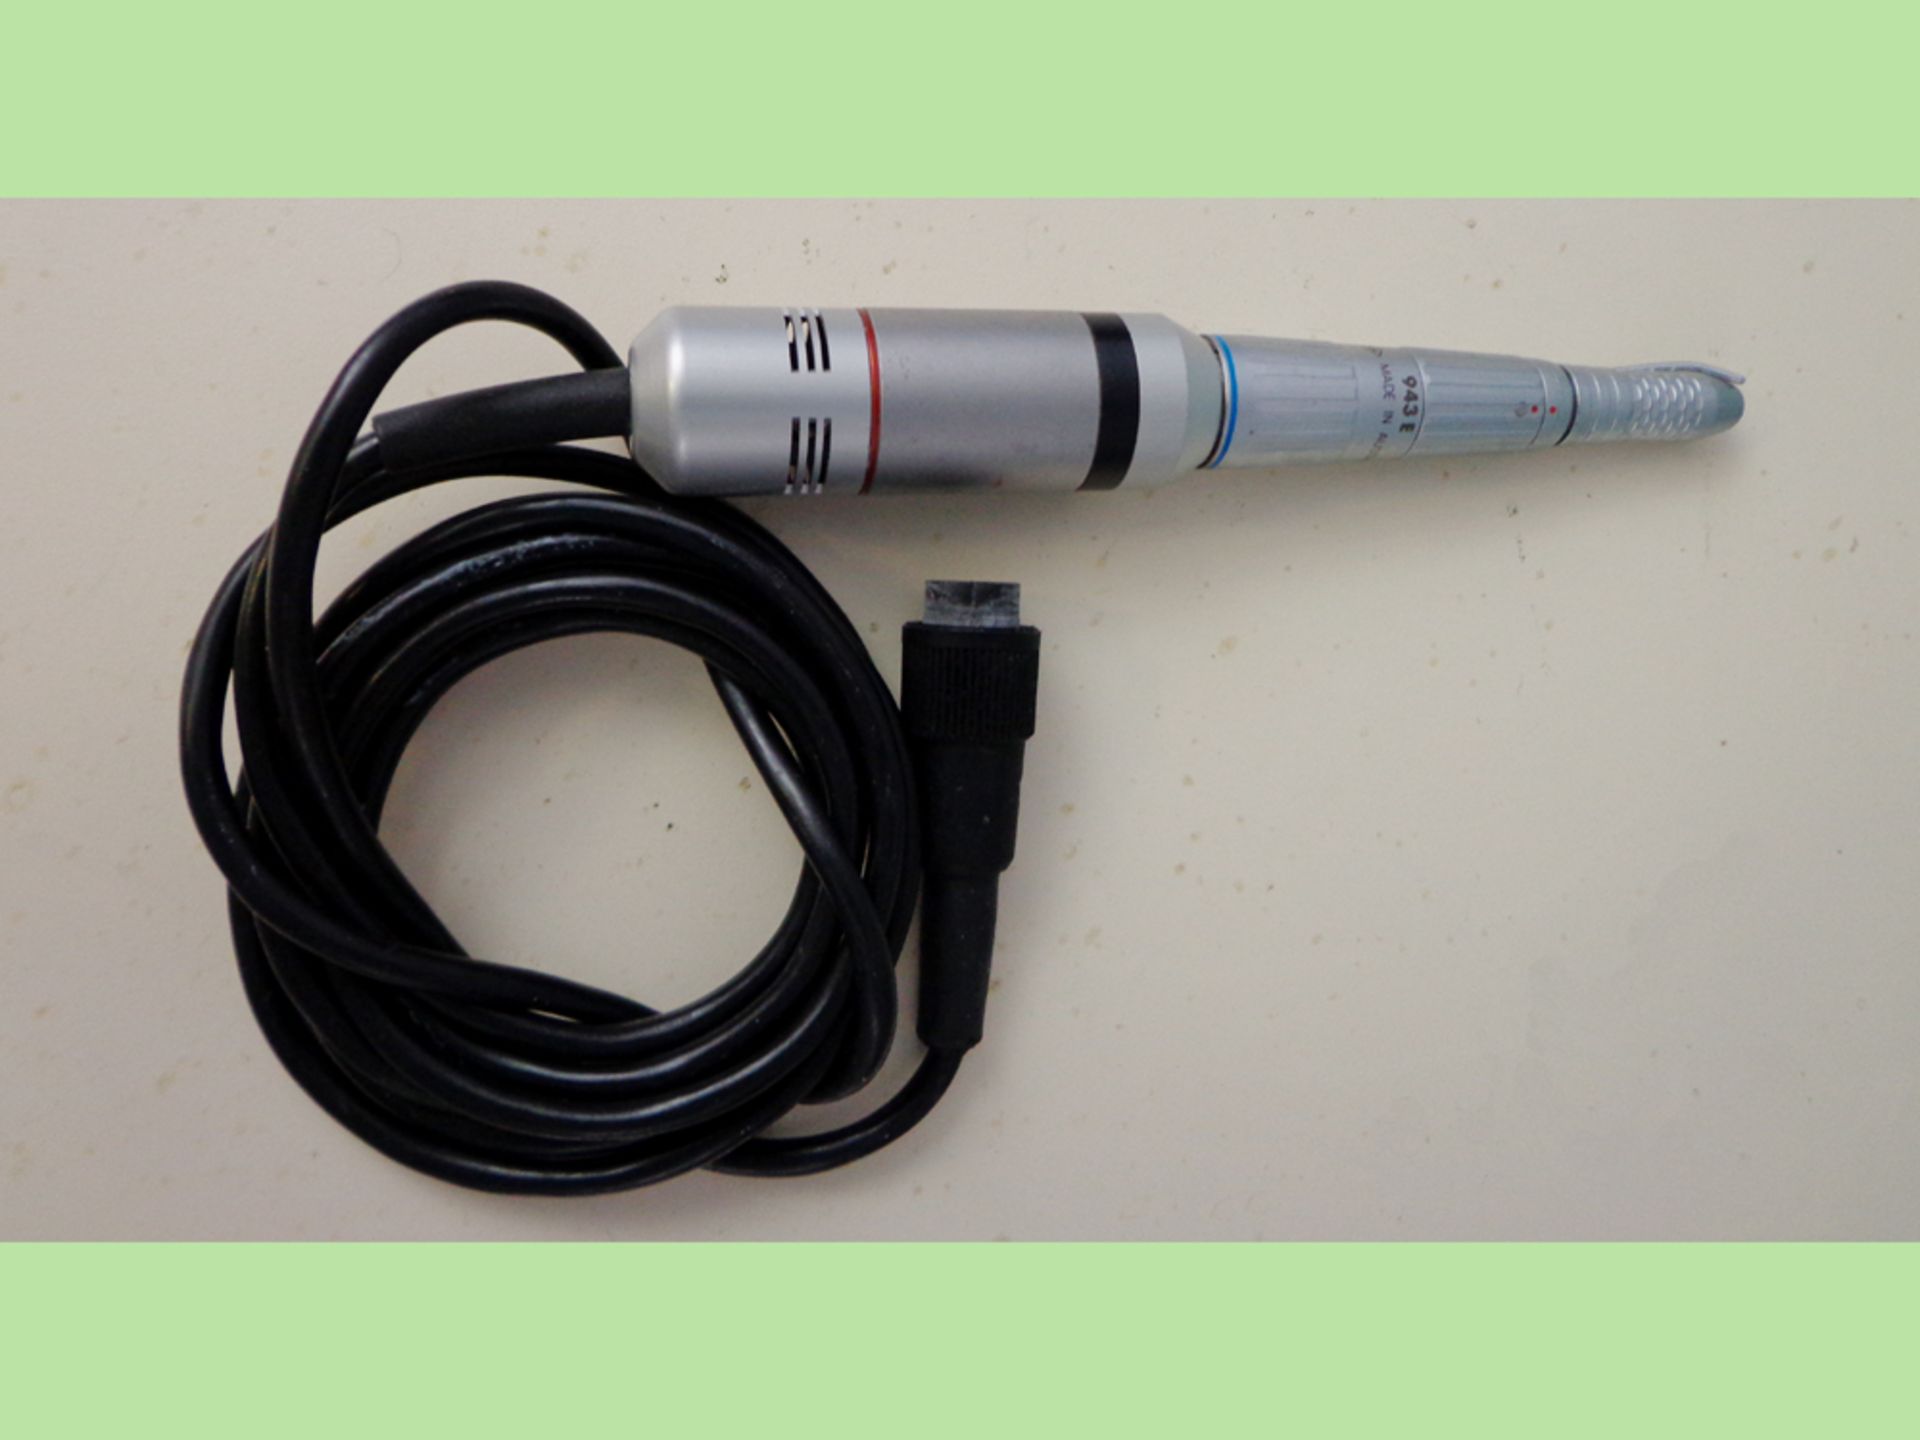 Nouvag AG NM-4000 Micromotor, with Foot Pedal and Motor Handpiece (943E). - Image 10 of 11